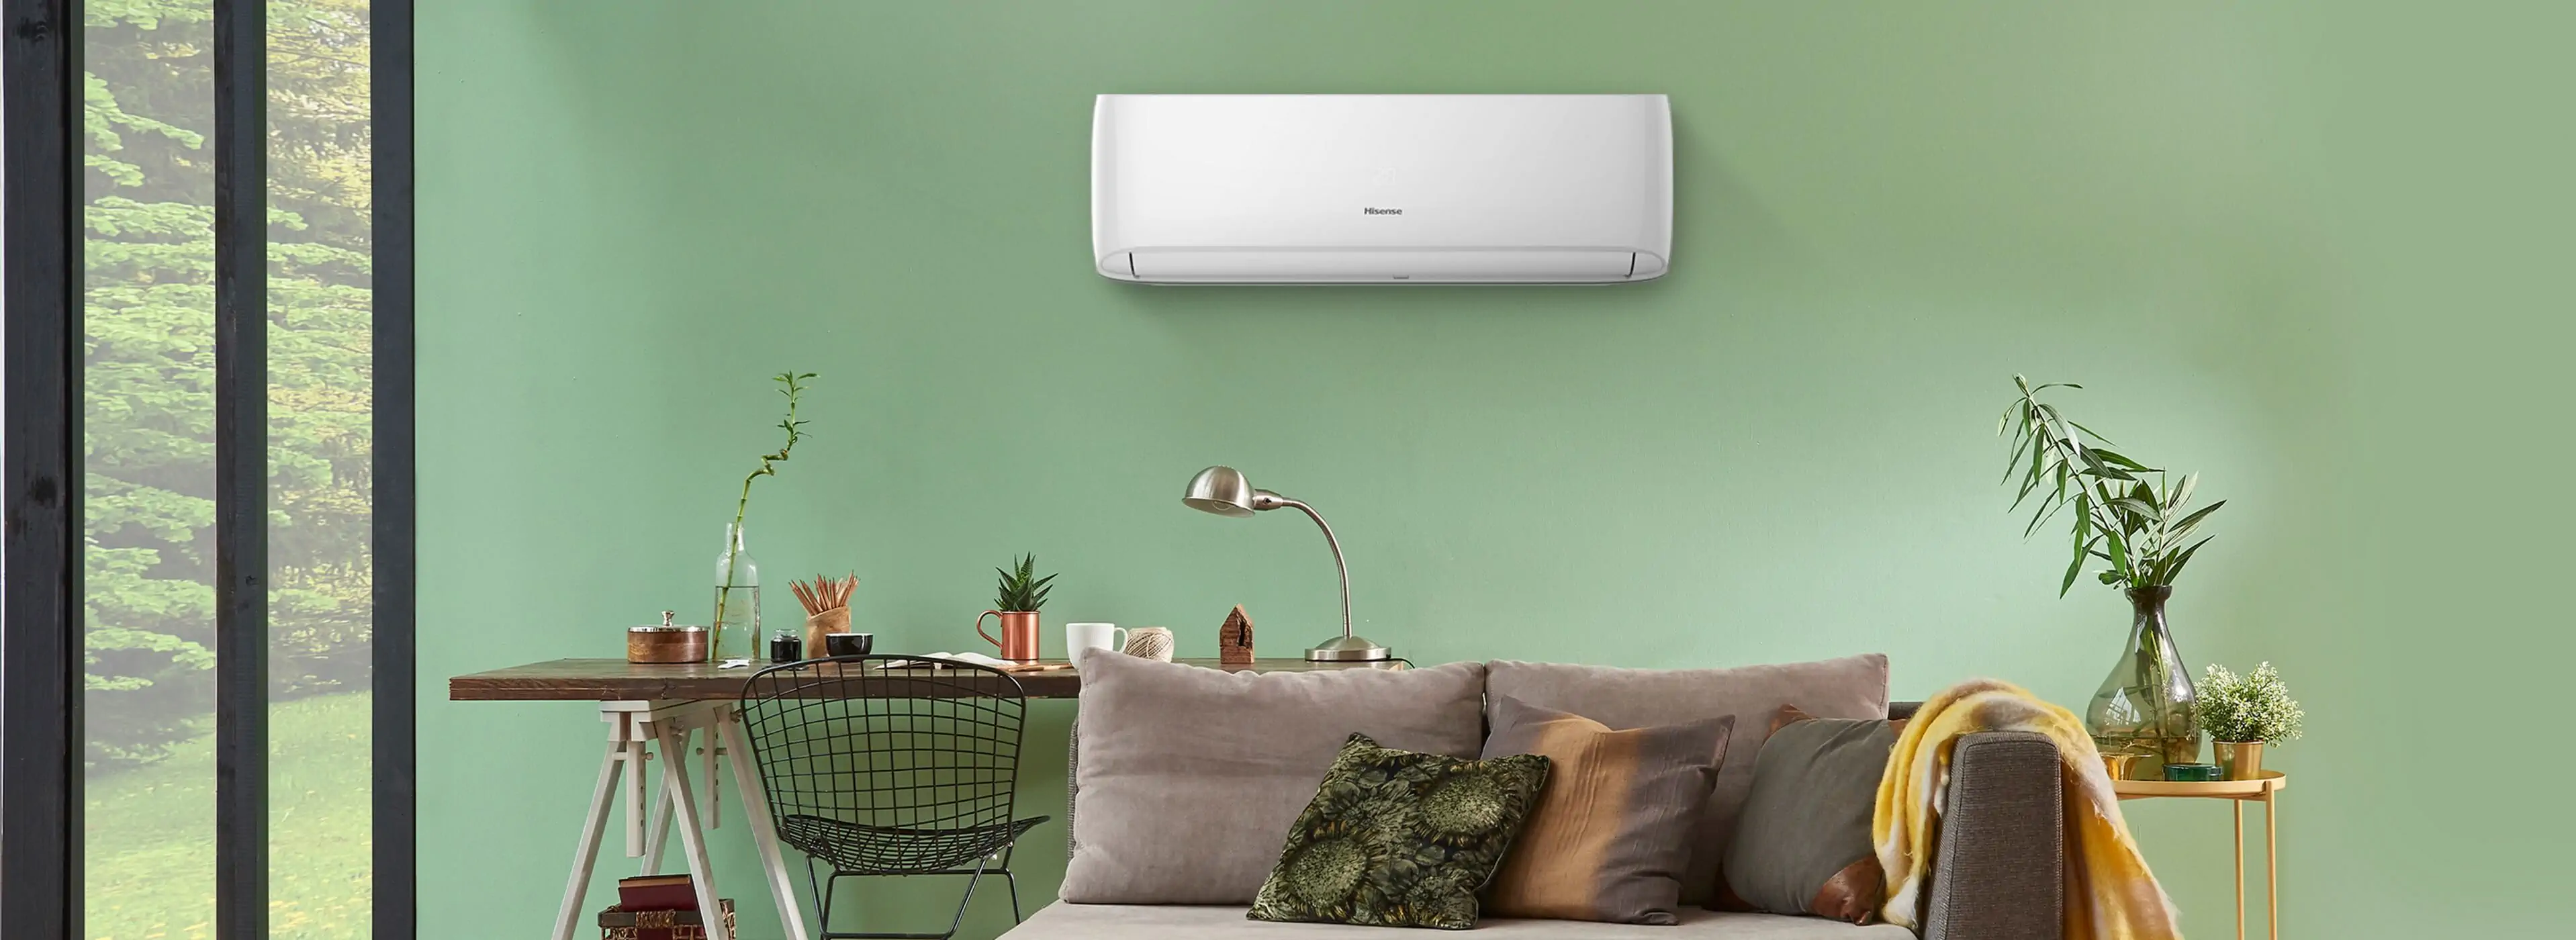 RS-airconditioners-main-banner-3840x1400-compressed.webp